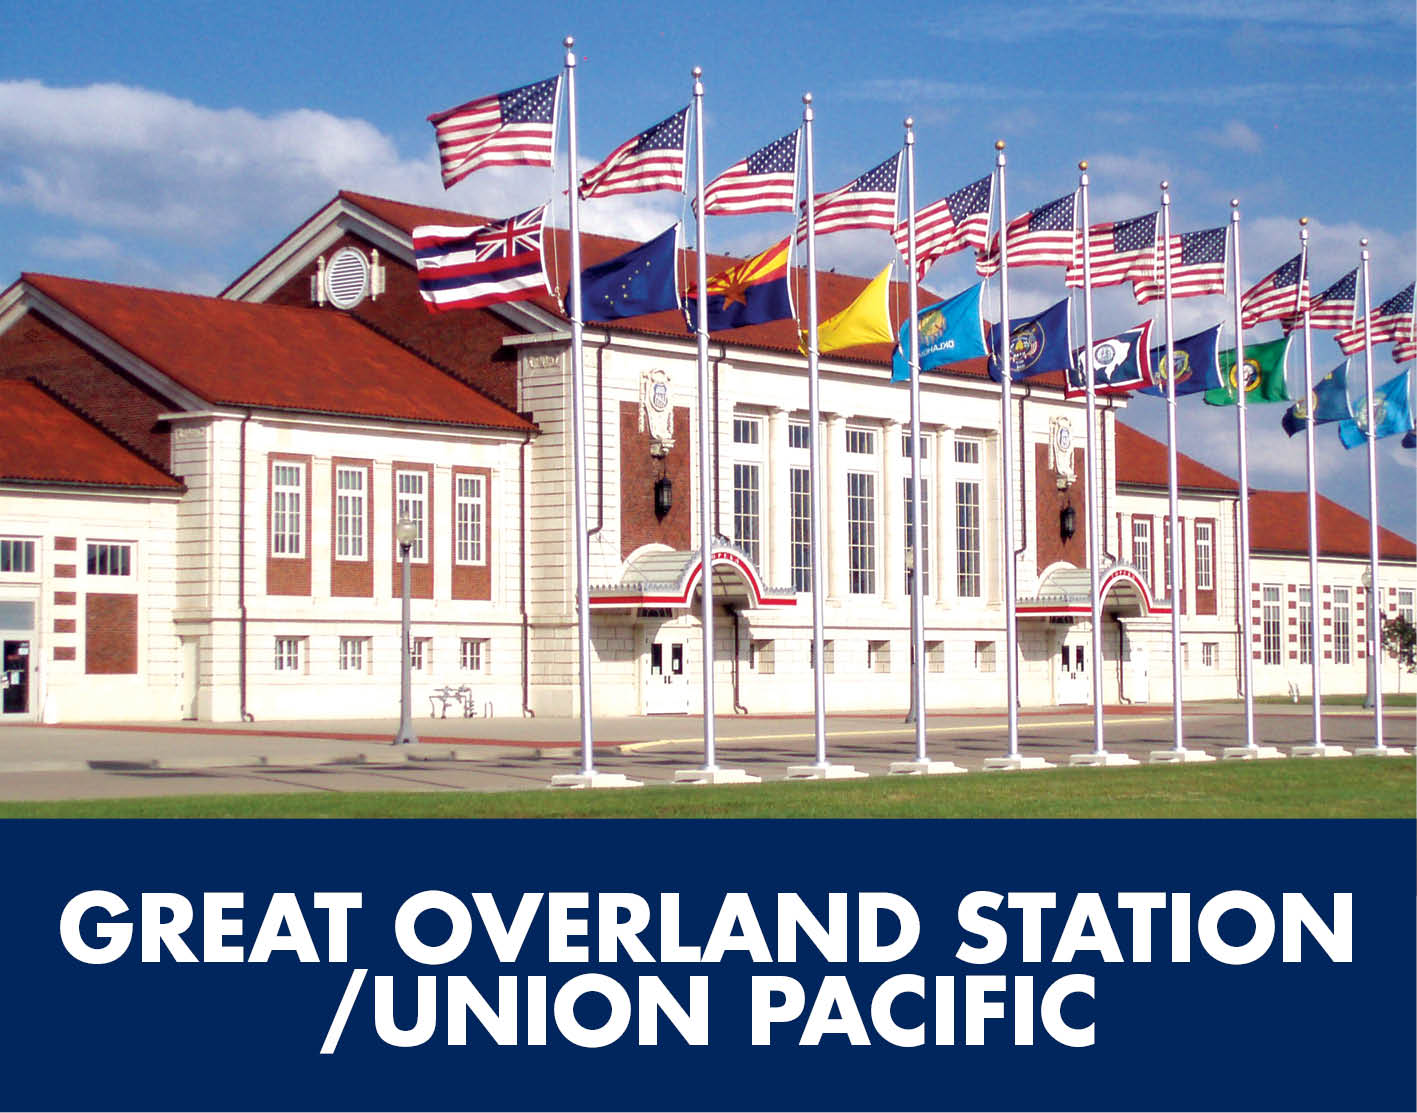 great overland station/union pacific